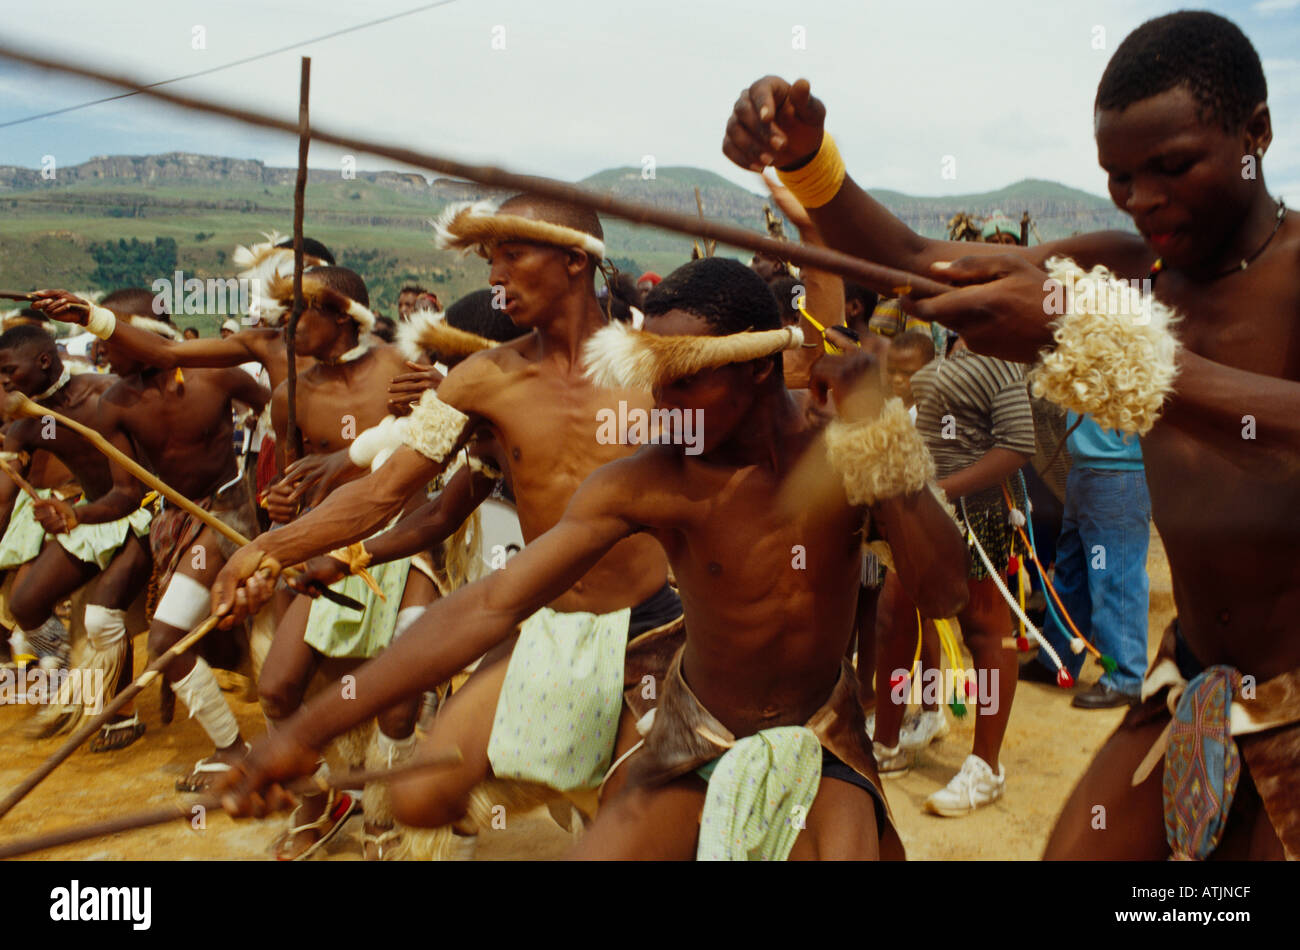 Centuries-old Zulu tradition of Stick-Fighting is today helping South  Africa to curb gang violence. Here's why - Face2Face Africa